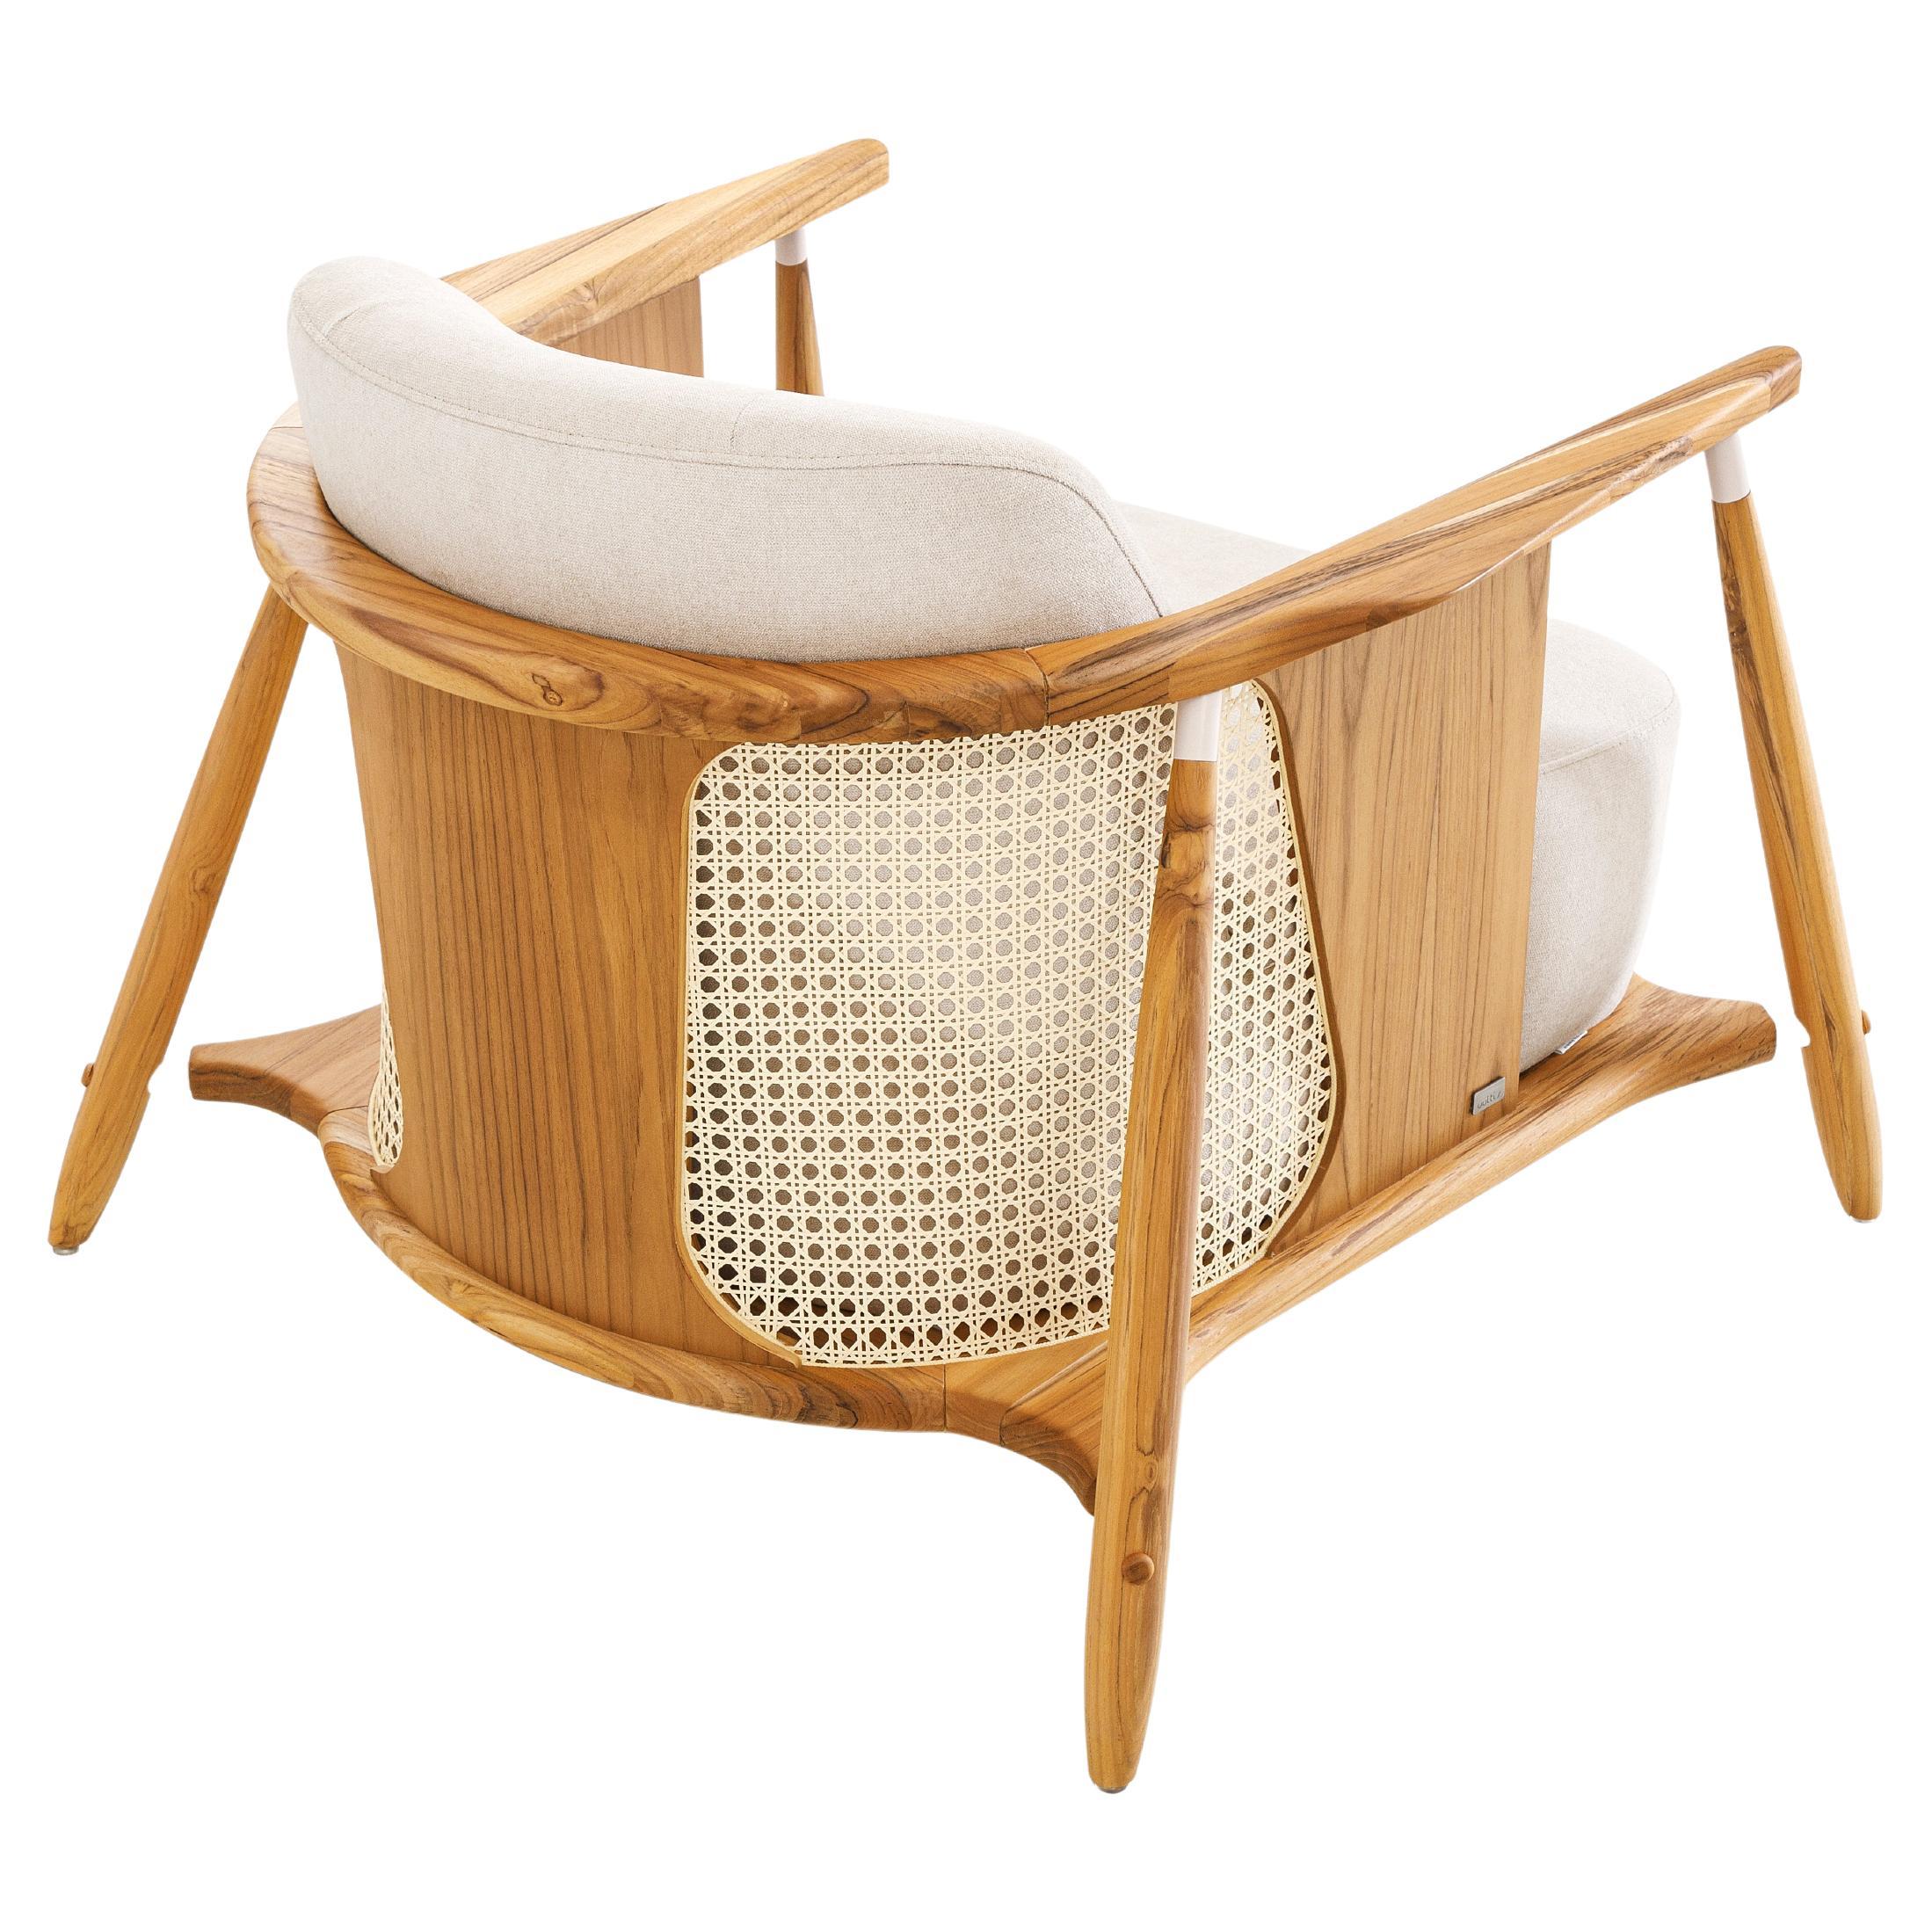 Laguna Occasional Chair in Light Beige Upholstered and Teak Wood Frame